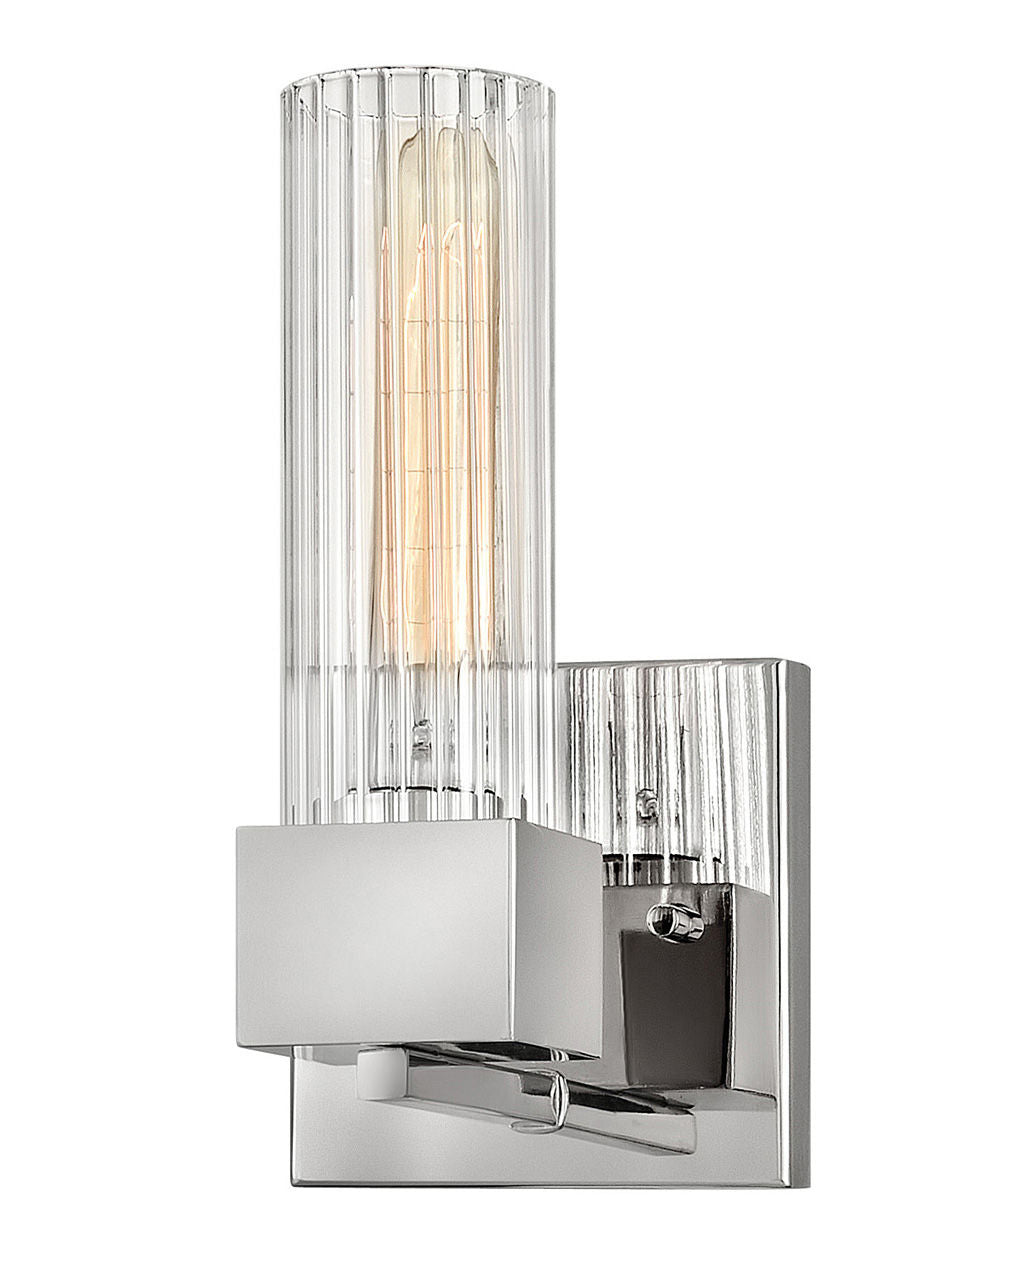 Hinkley Xander Vanity Wall Sconce Collection